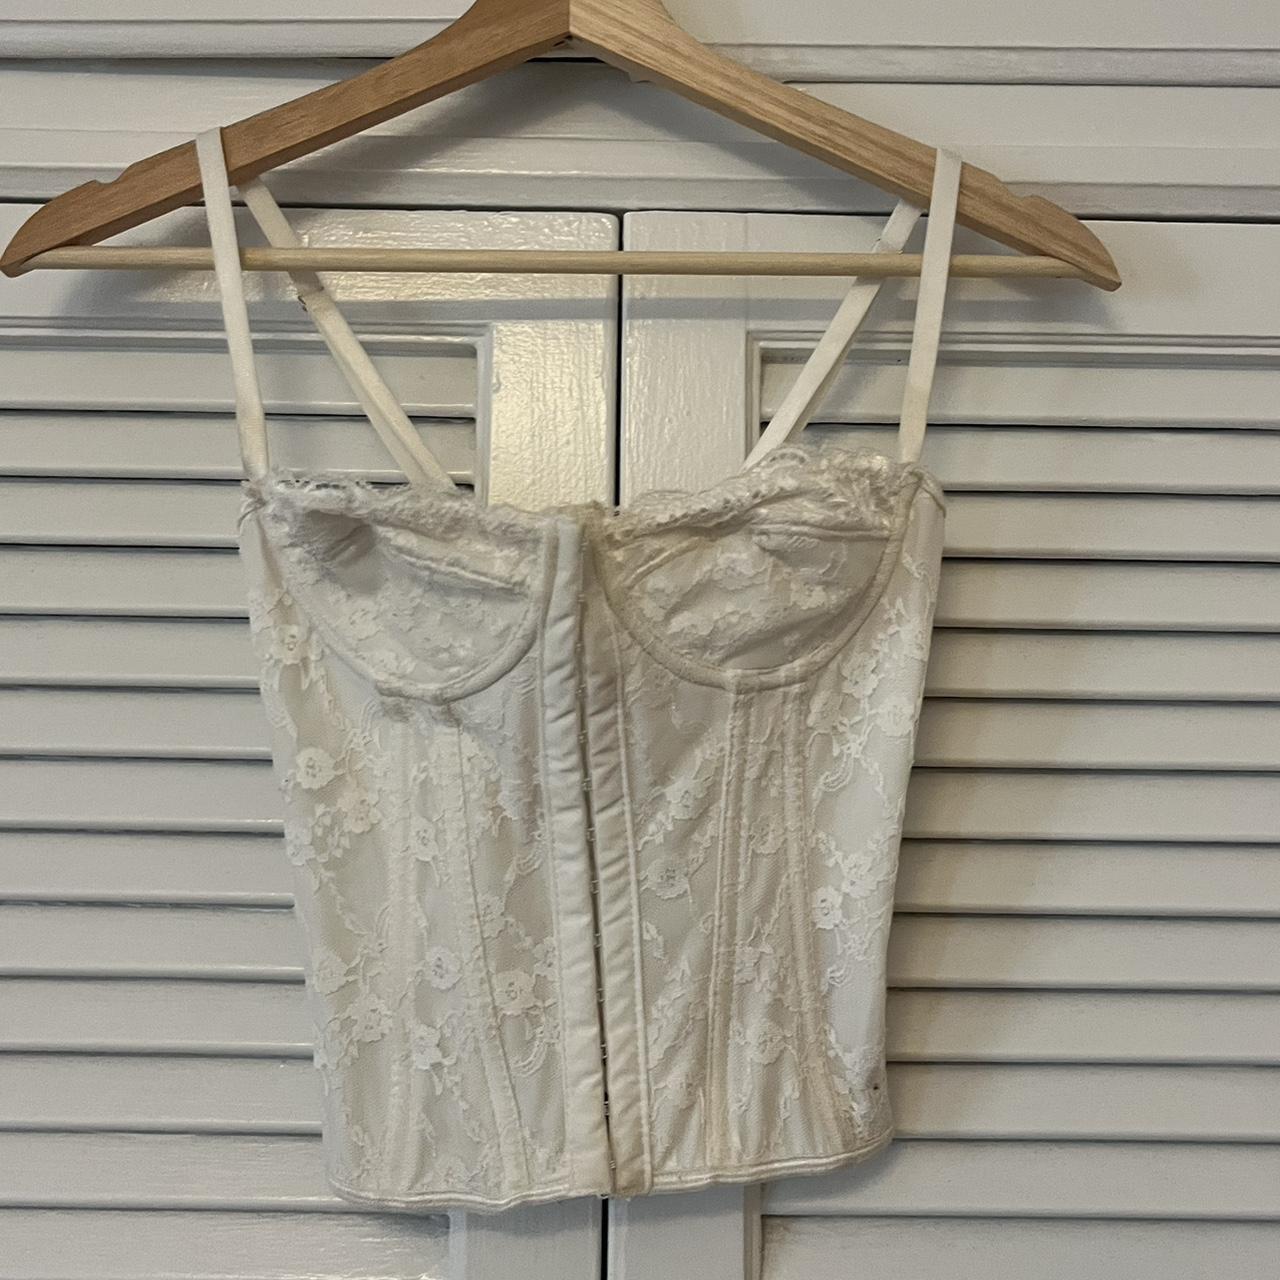 White lace bustier top •fits well for XS-M depending - Depop